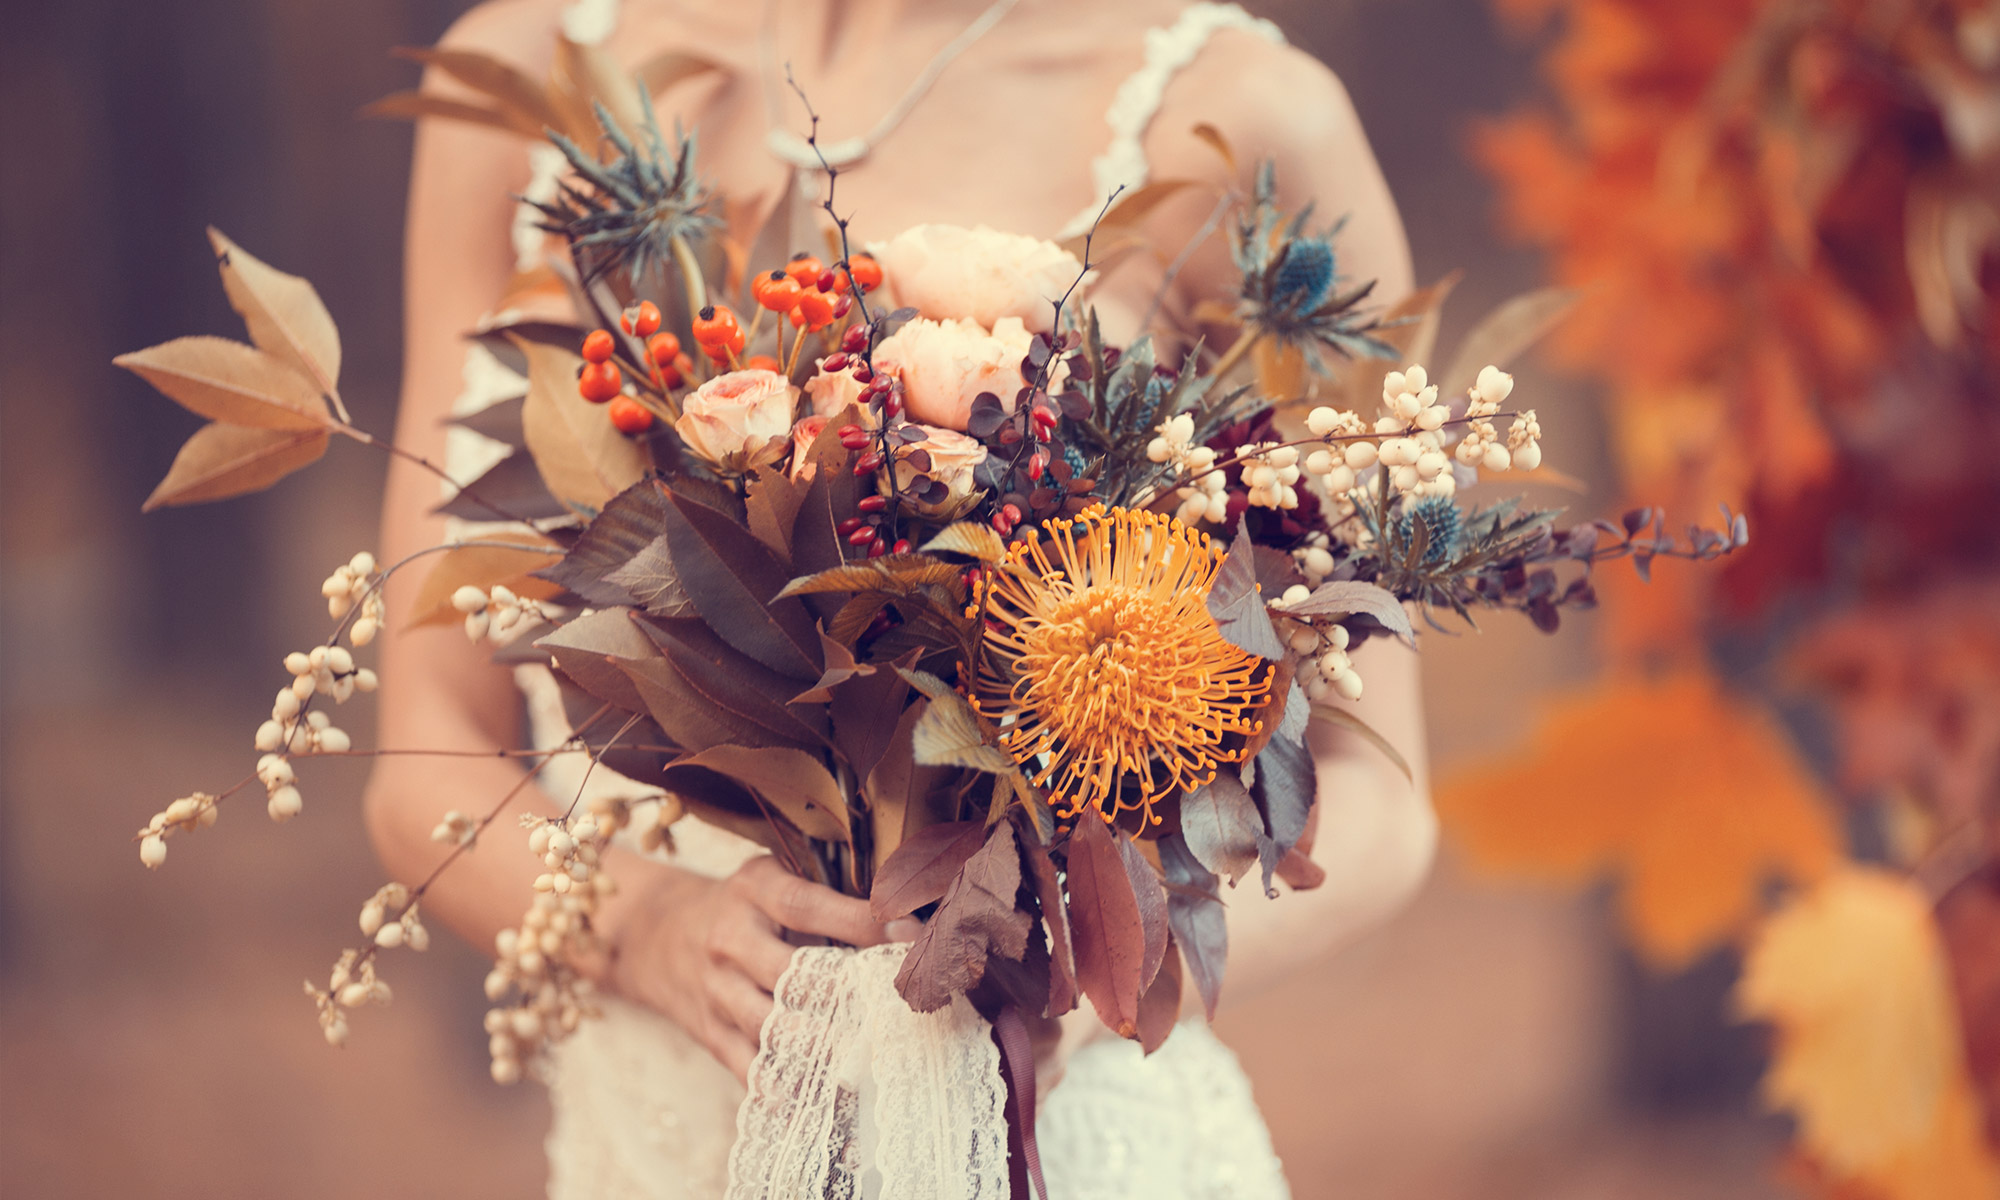 Fall in Love with These Harvest Wedding Menus Ideas